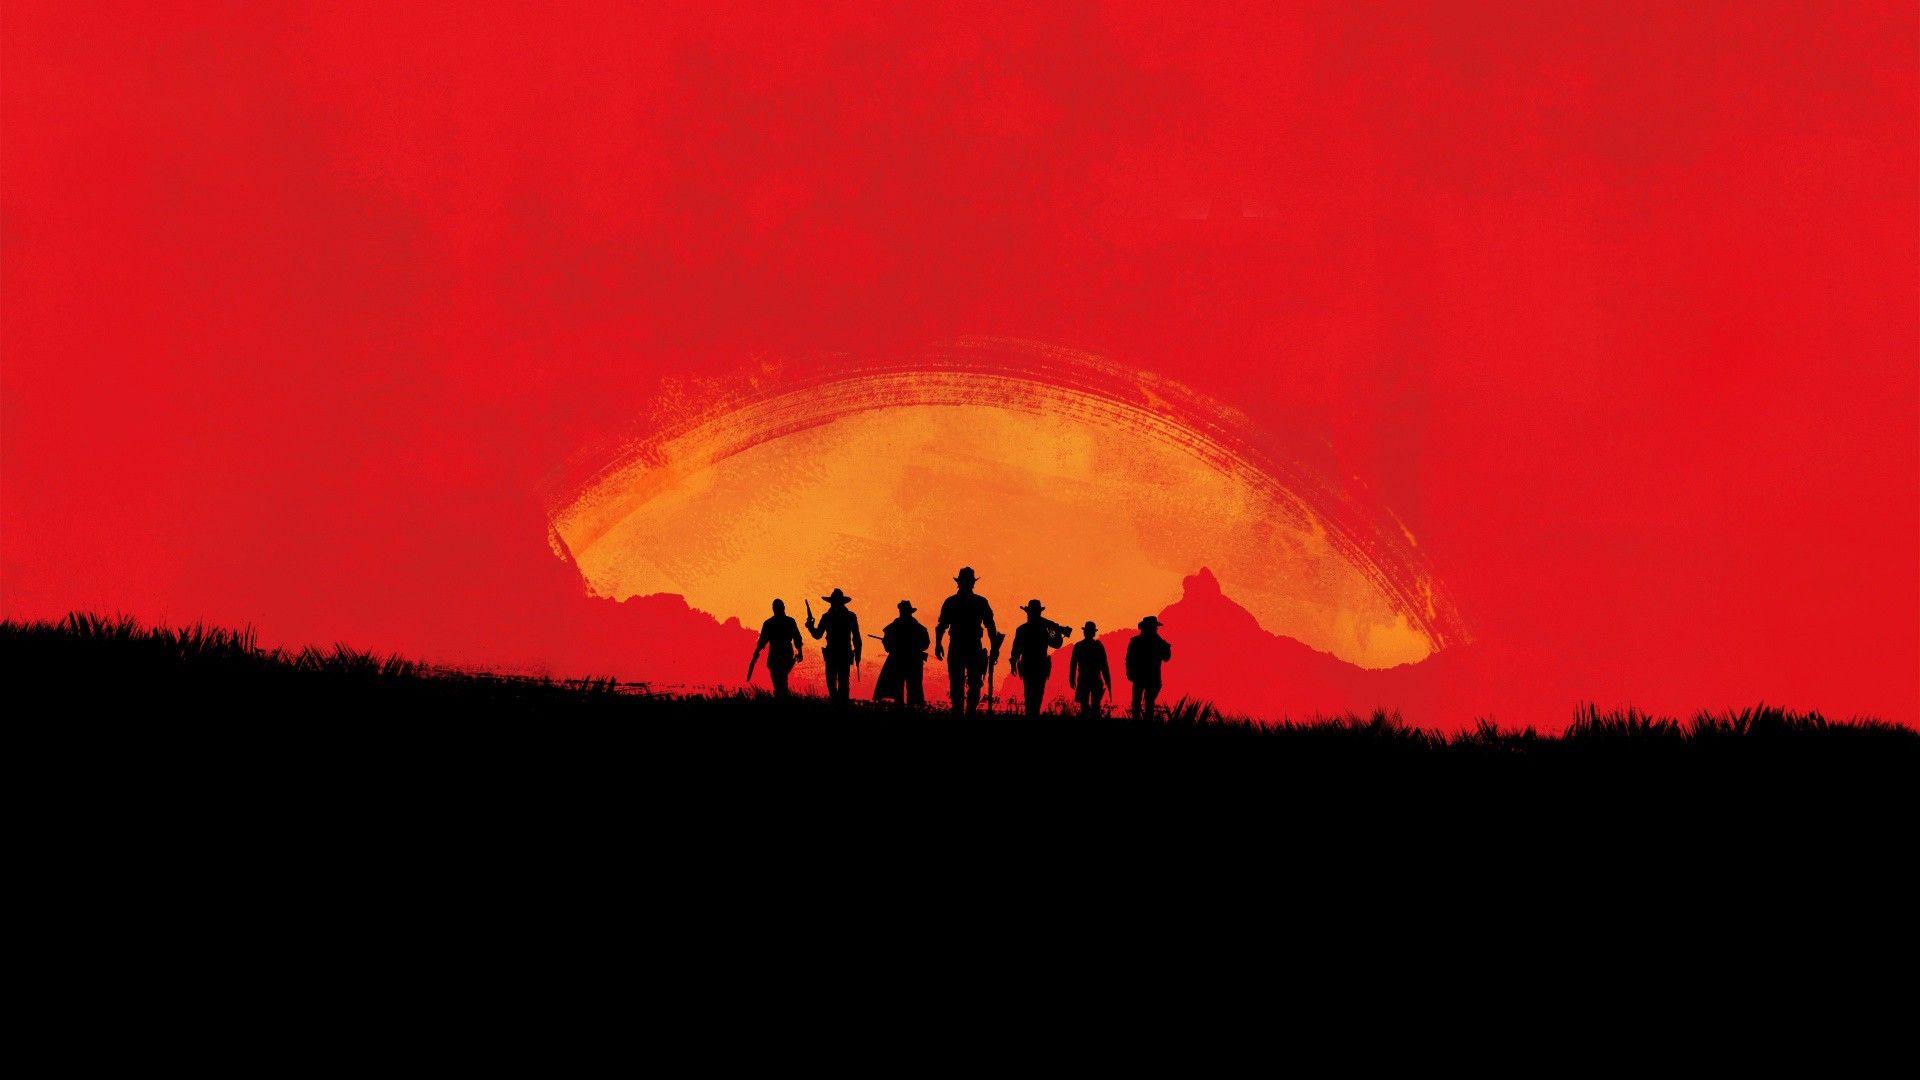 Red Dead Redemtion 2 Wallpaper Free Red Dead